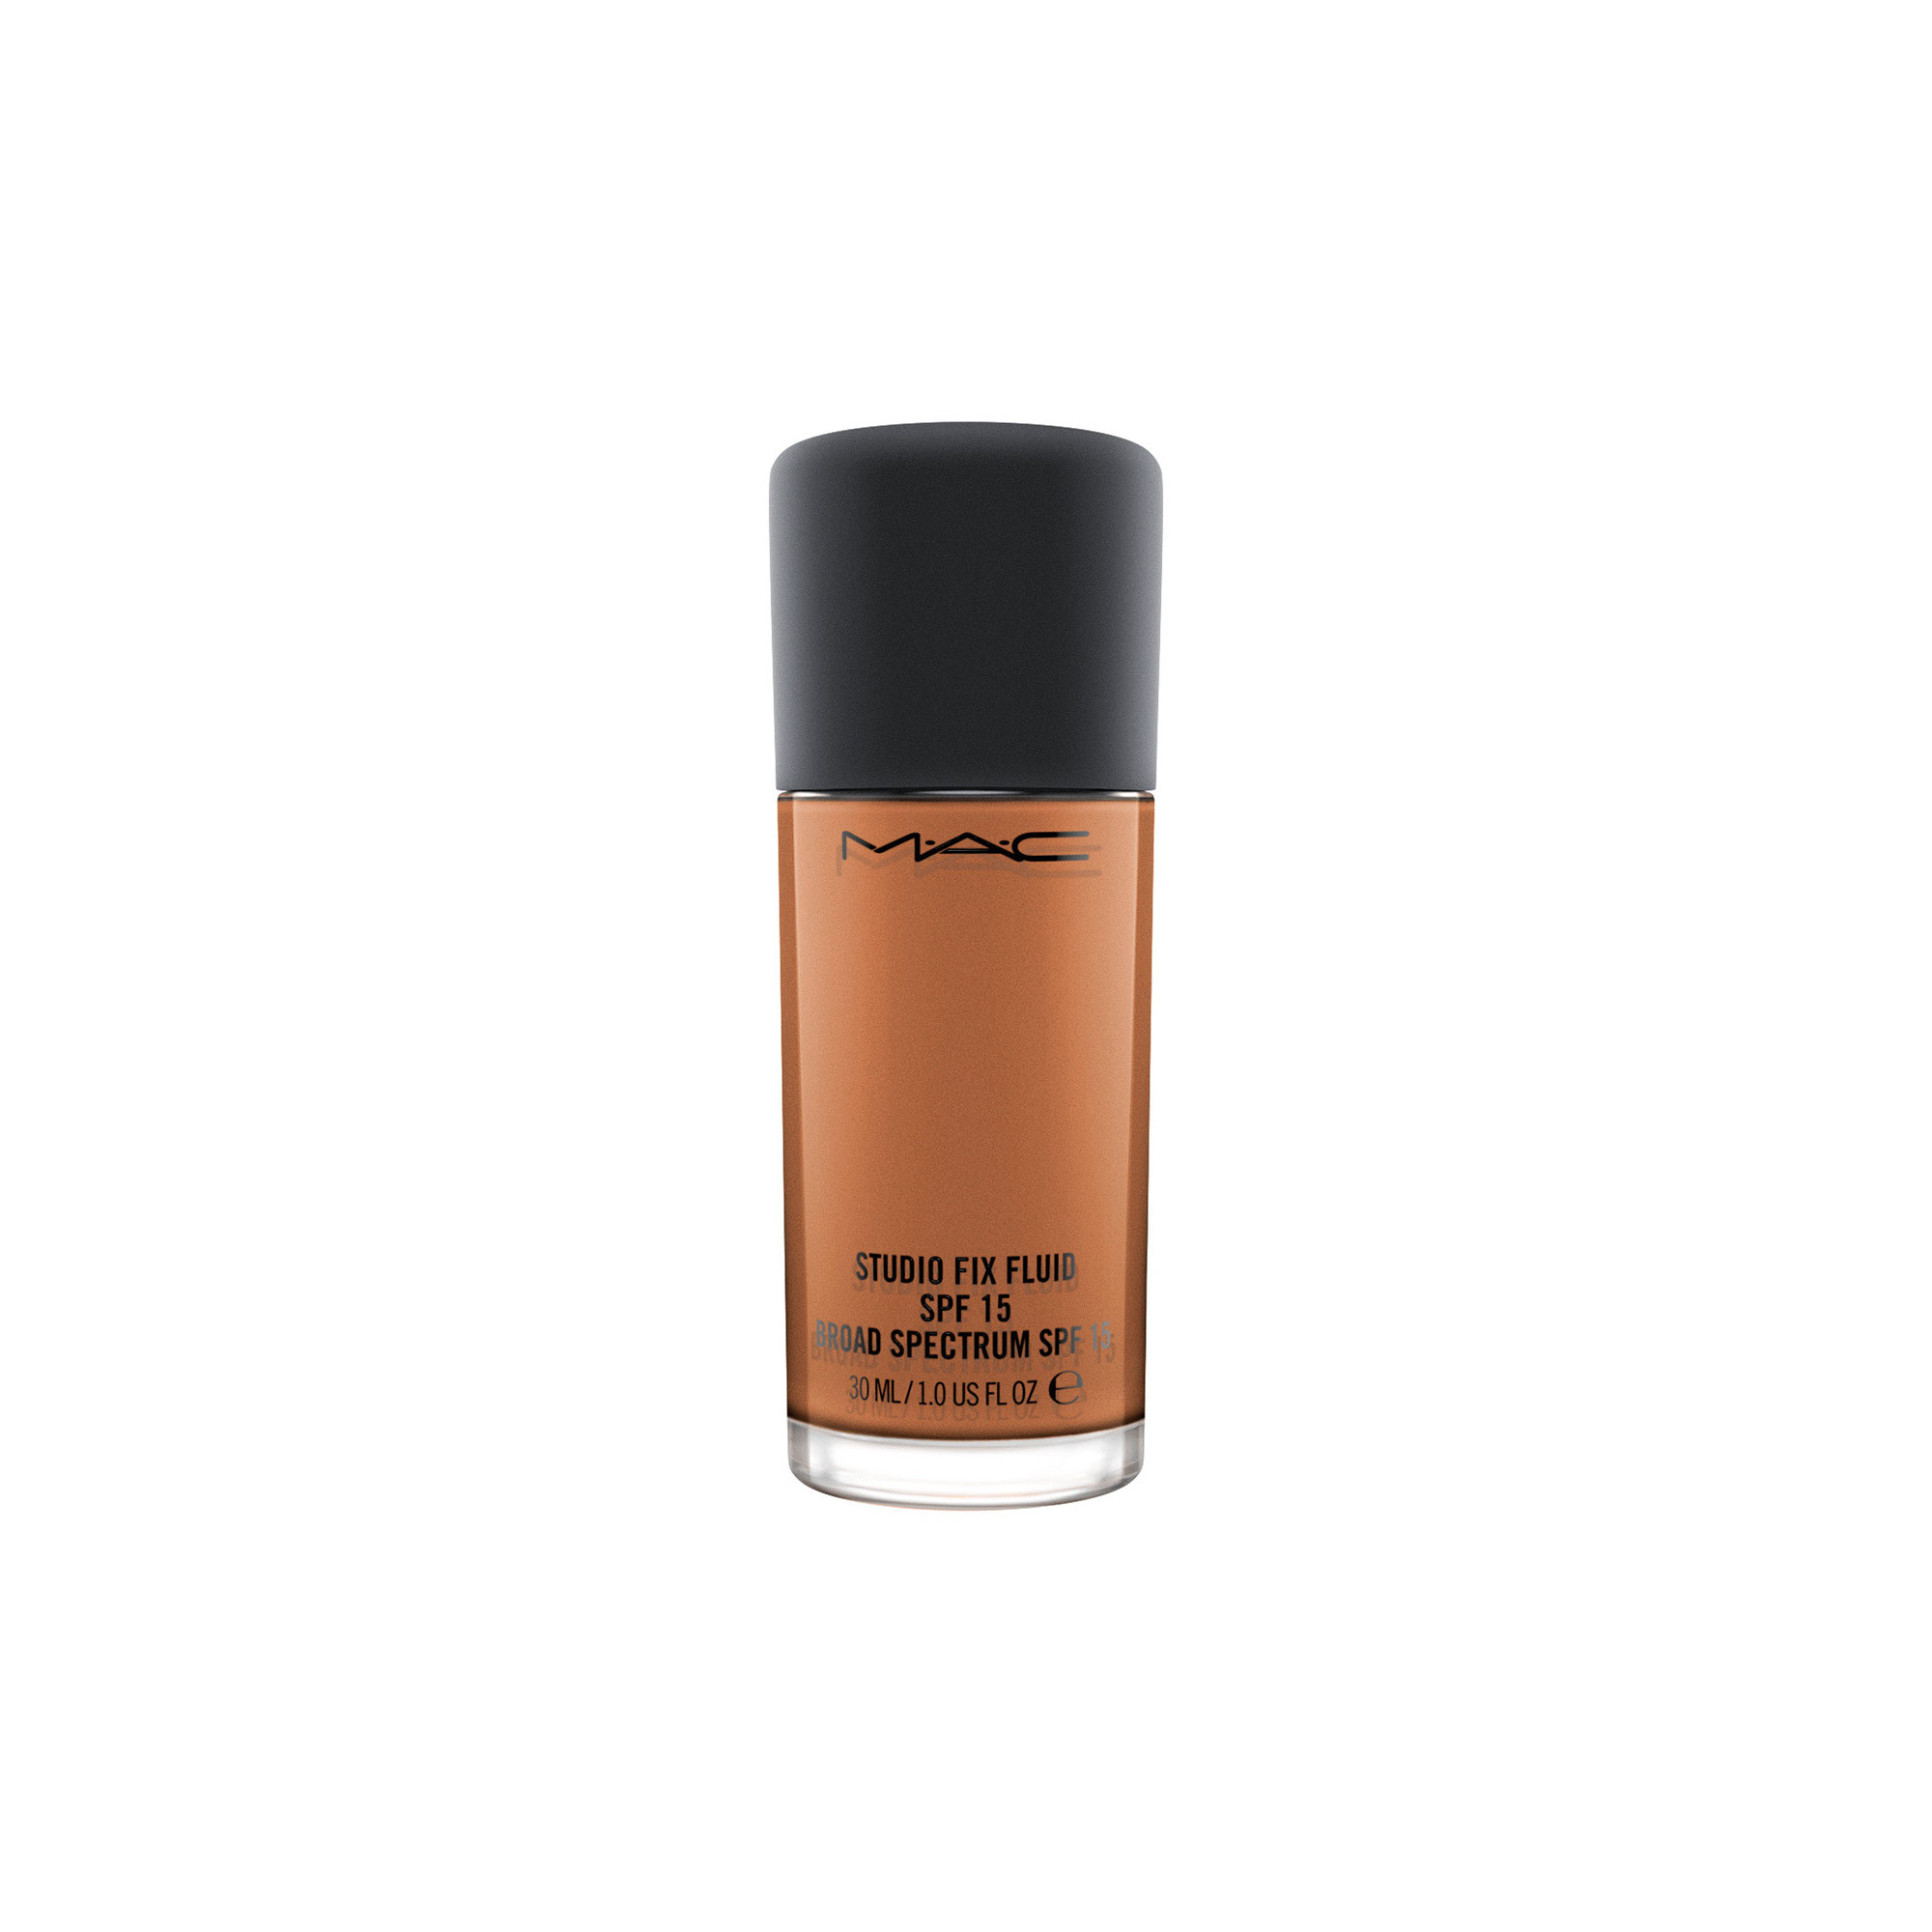 Studio Fix Fluid Foundation Spf15 - NW53, NW53, large image number 0